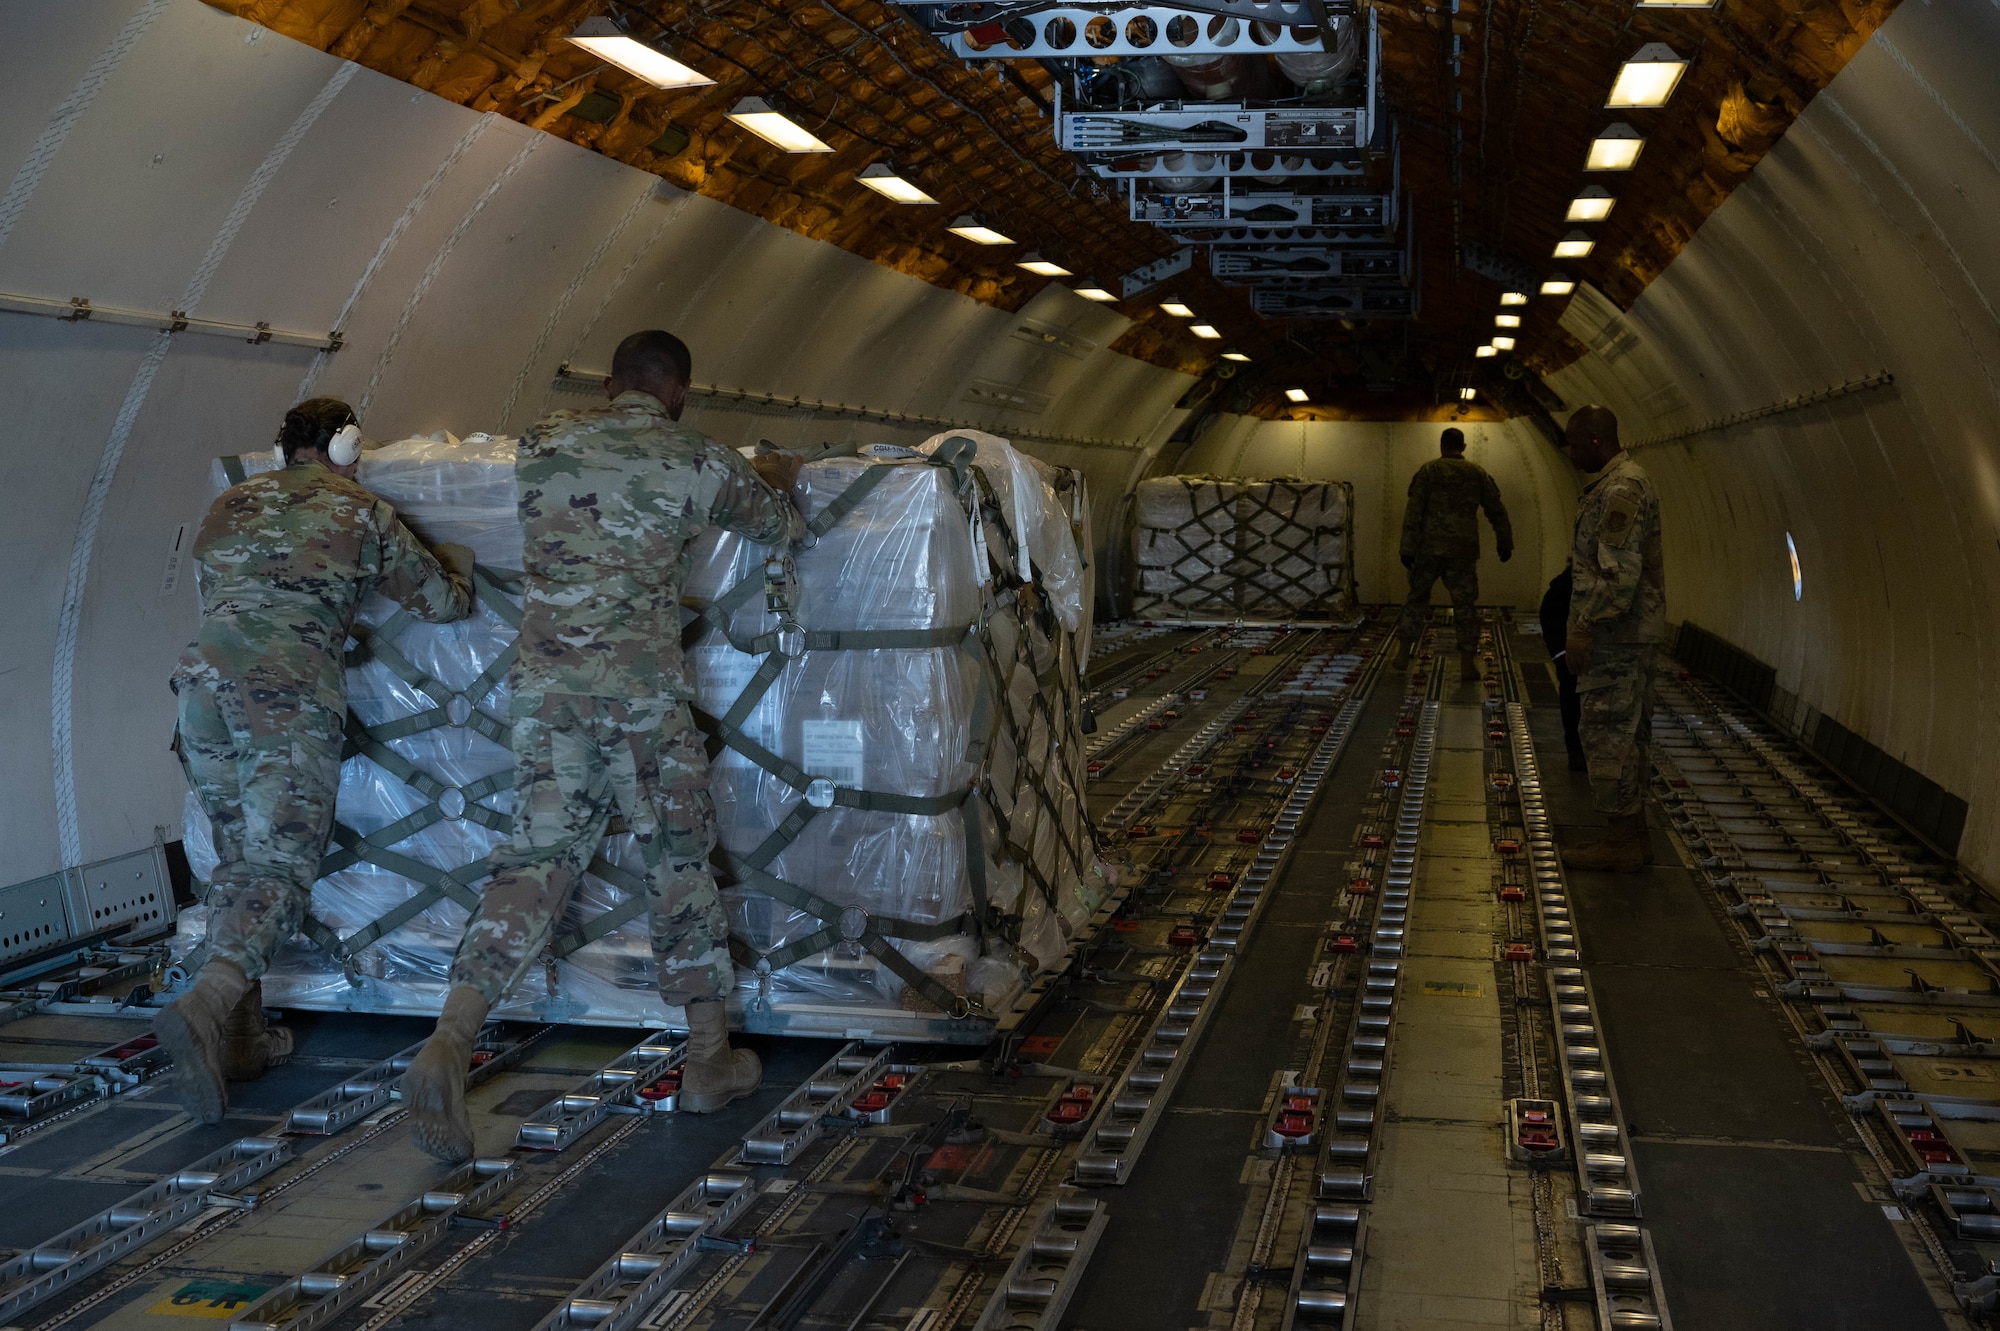 Port dawgs push a pallet of infant formula inside a commercial aircraft.